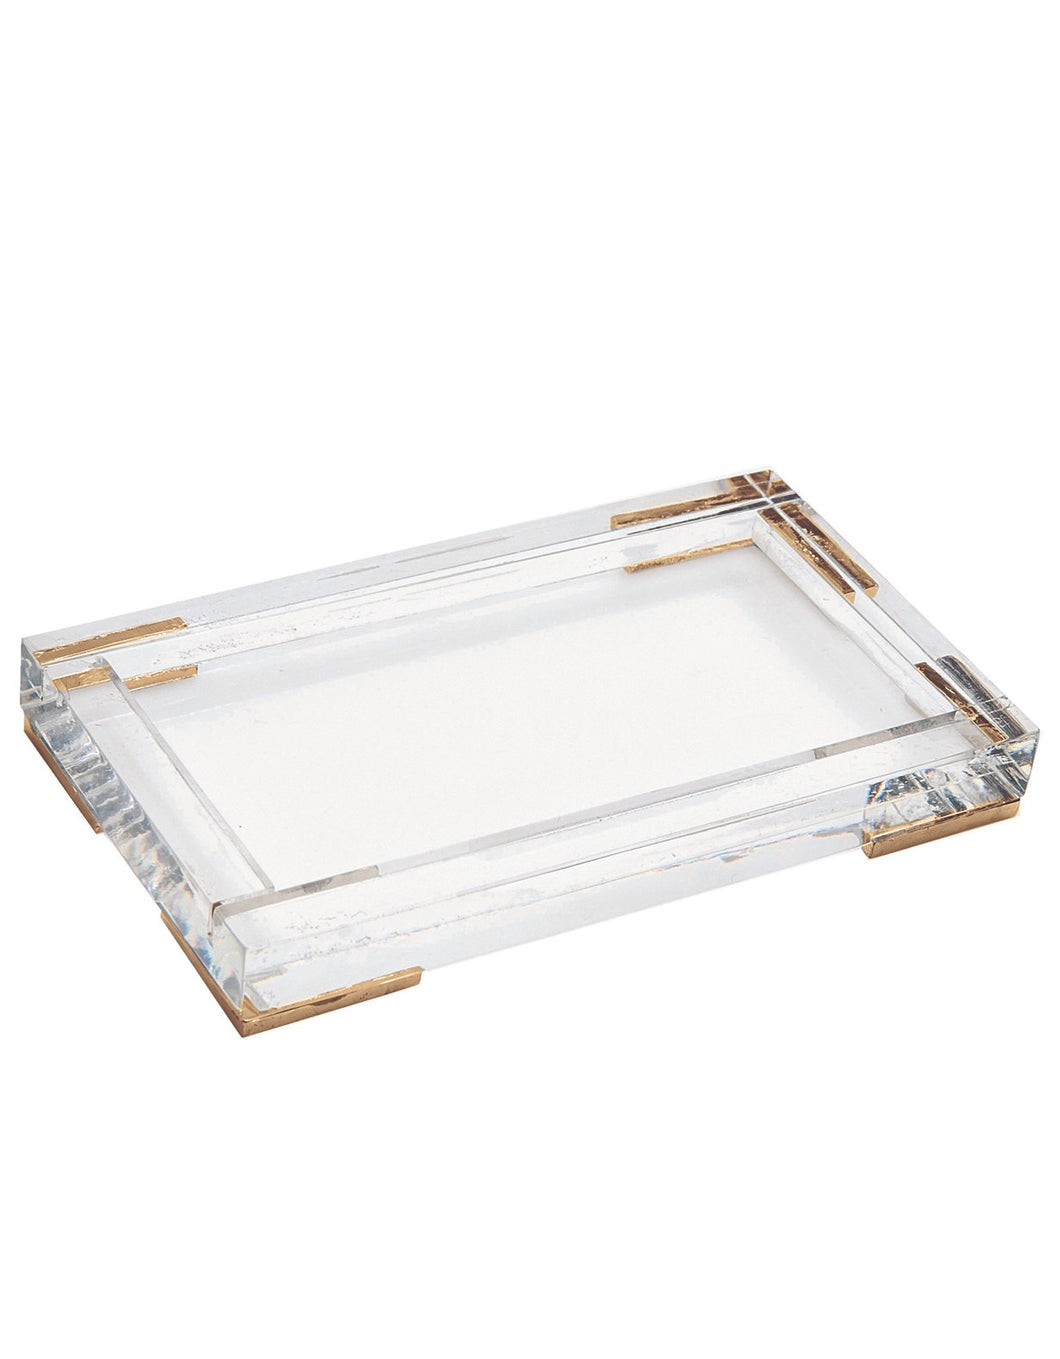 Rectangular clear lucite shallow tray with brass corner accents